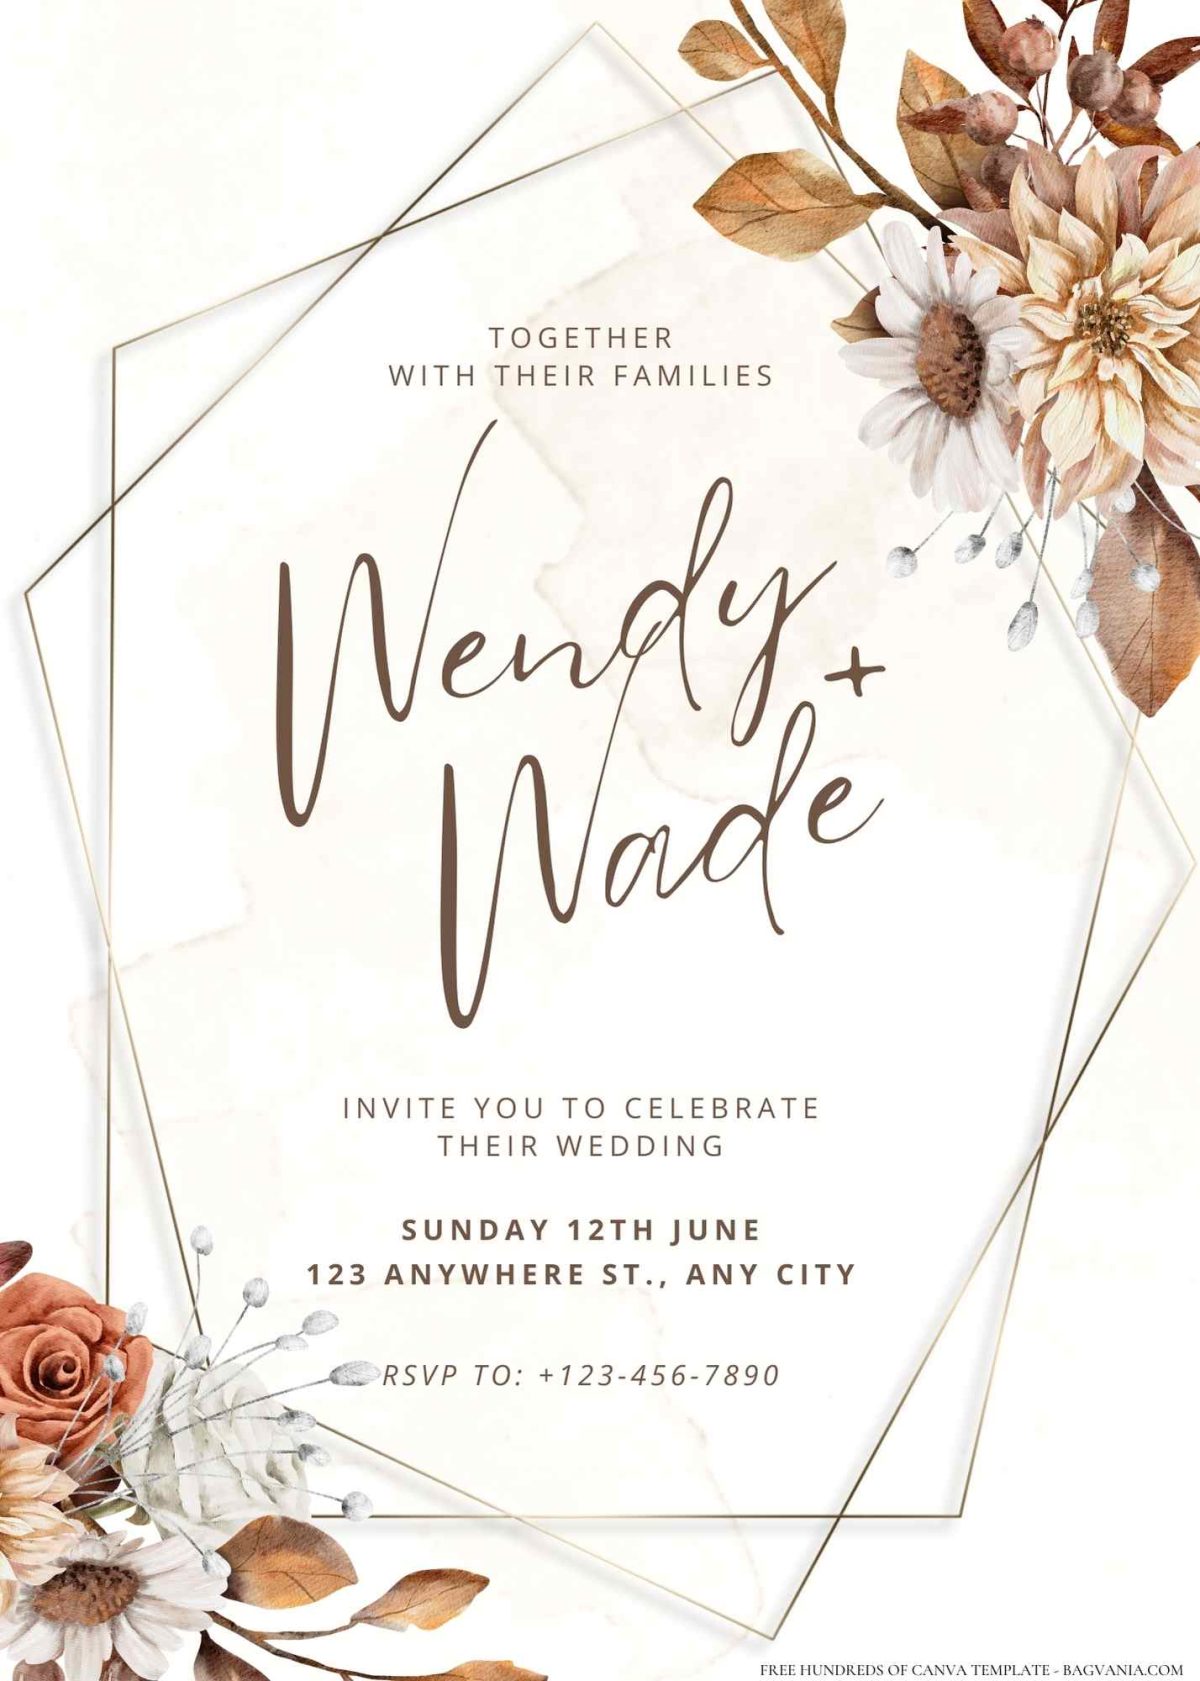 FREE Editable vintage floral patterns with an elegant touch wedding invitation